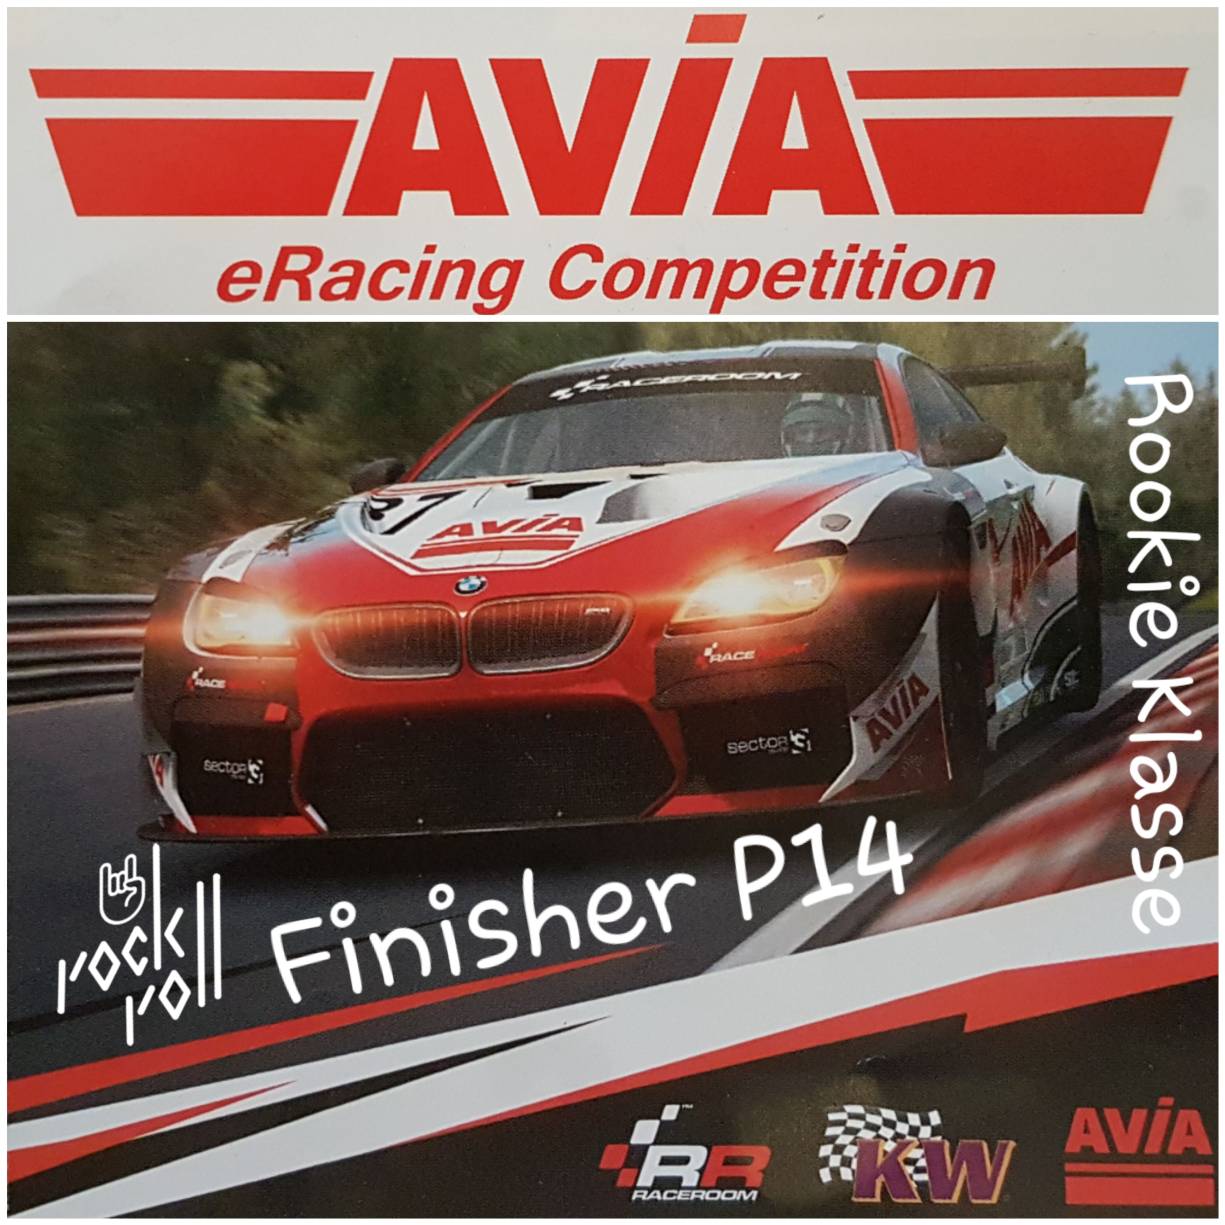 Avia eRacing Competition Finisher P14